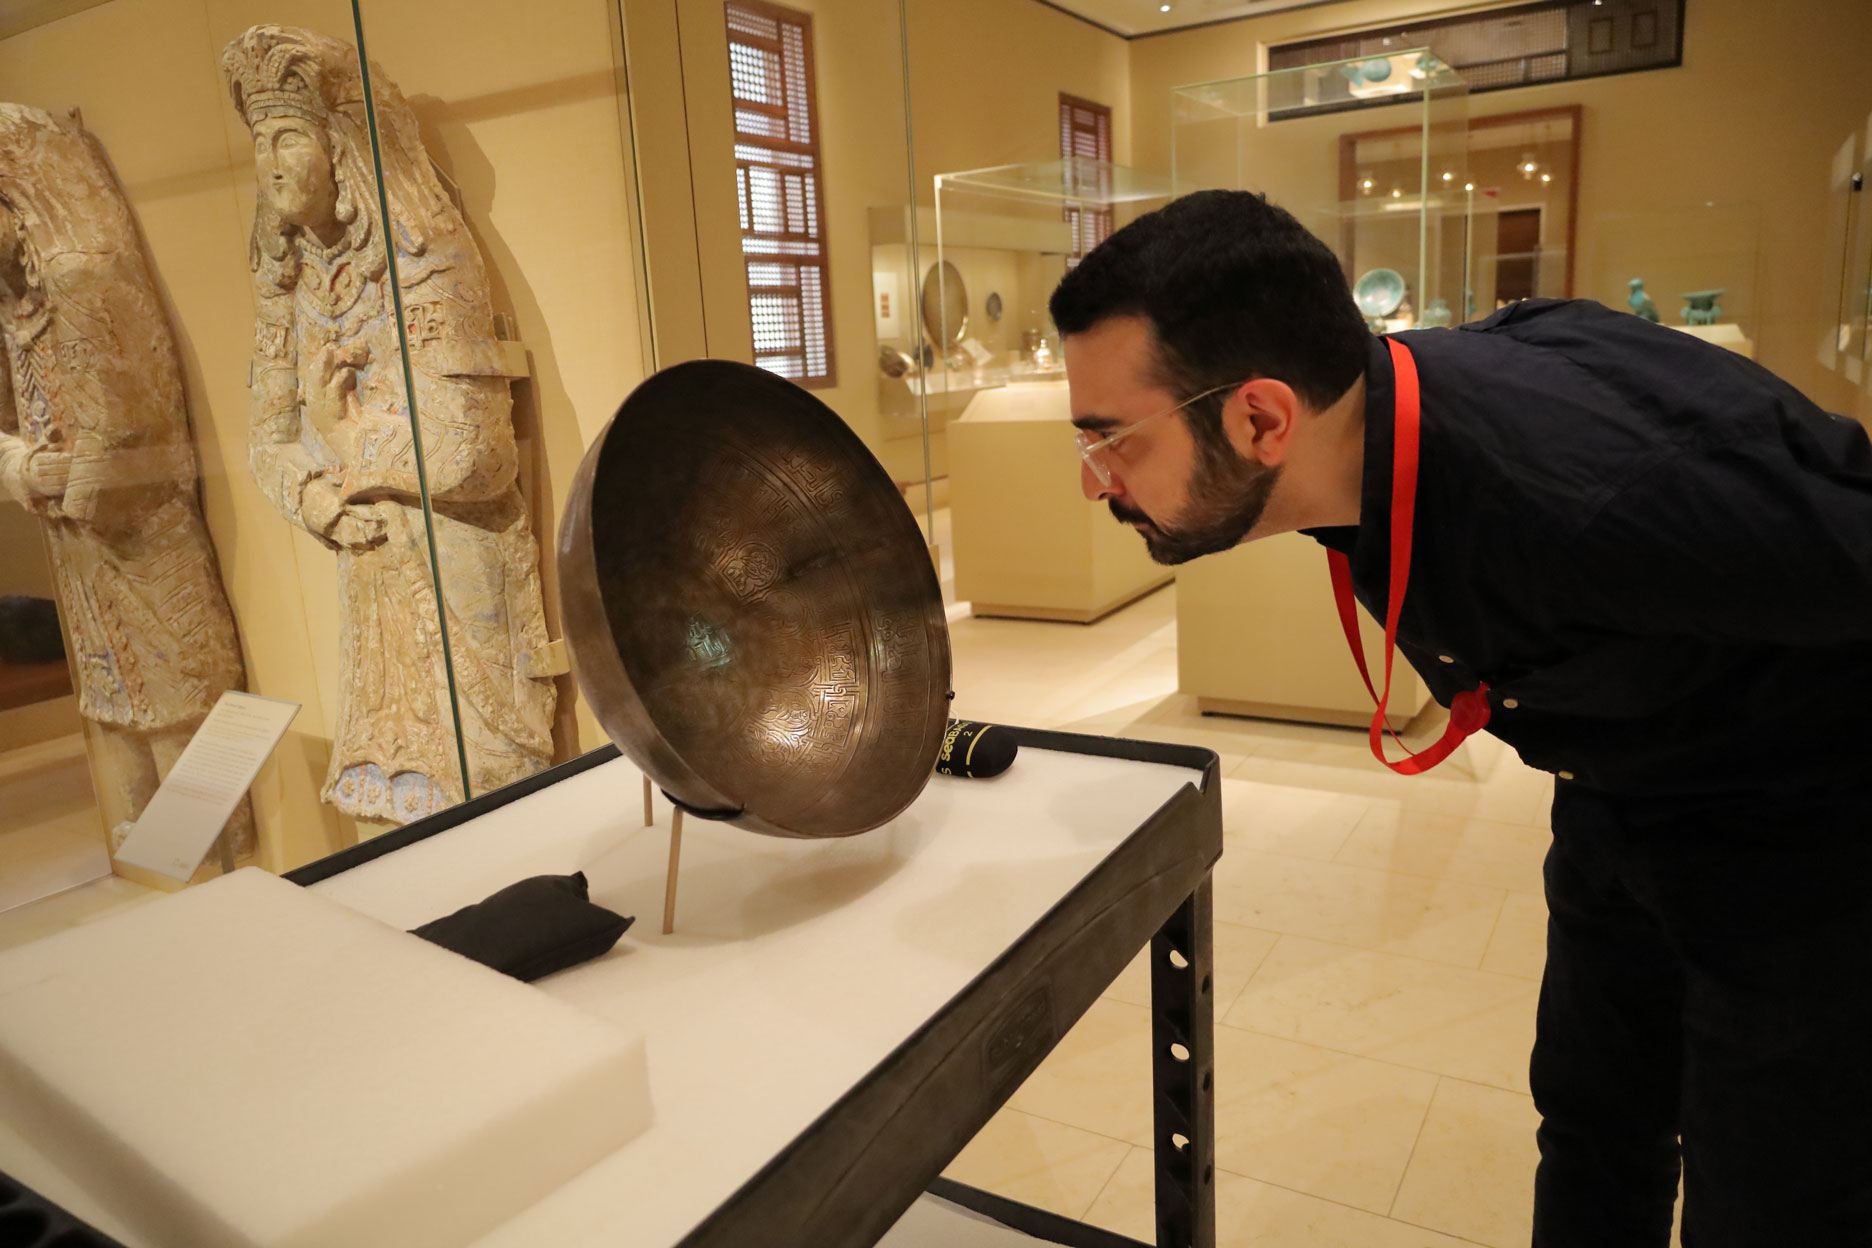 Sixth year Ph.D. student Arvin Maghsoudlou examines a piece of work for his art history program.